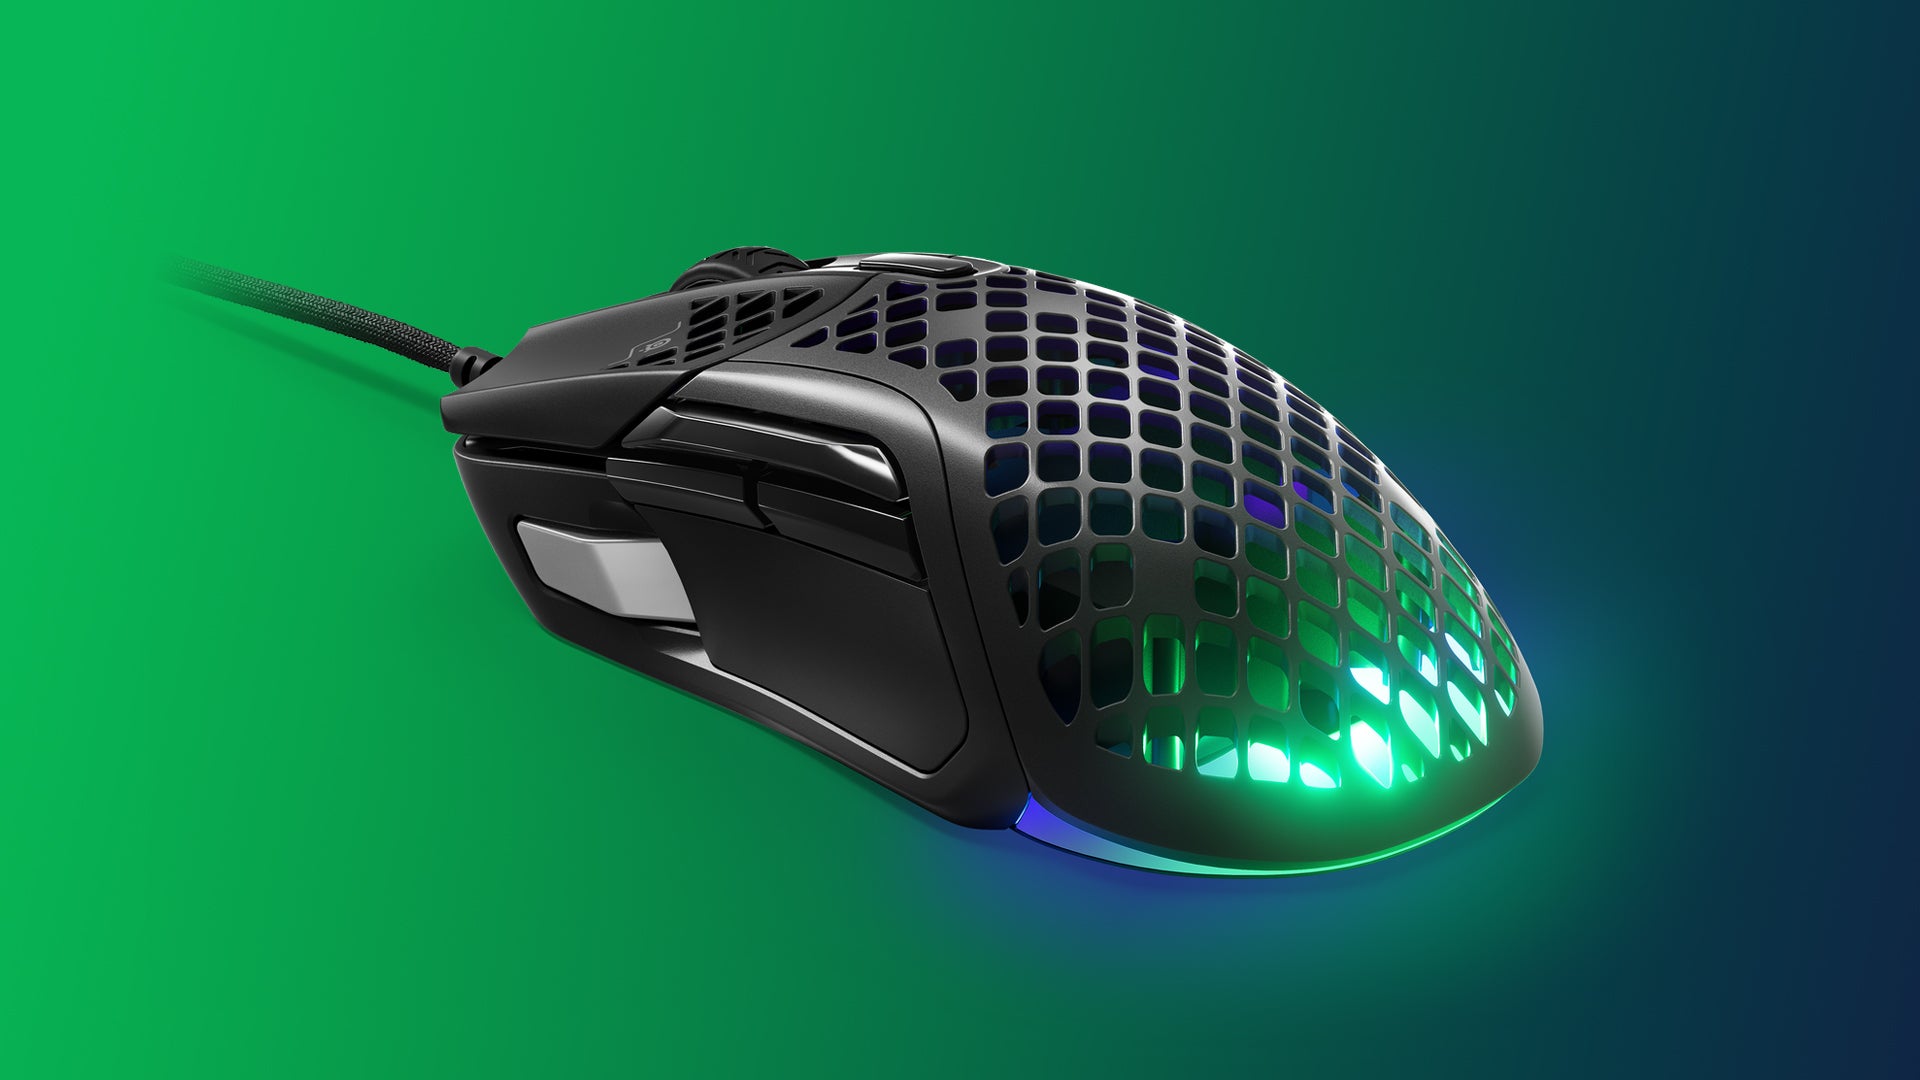 This Excellent Steelseries Aerox 5 Ultralight Mouse Is Down 38 At Amazon Right Now Eurogamer Net